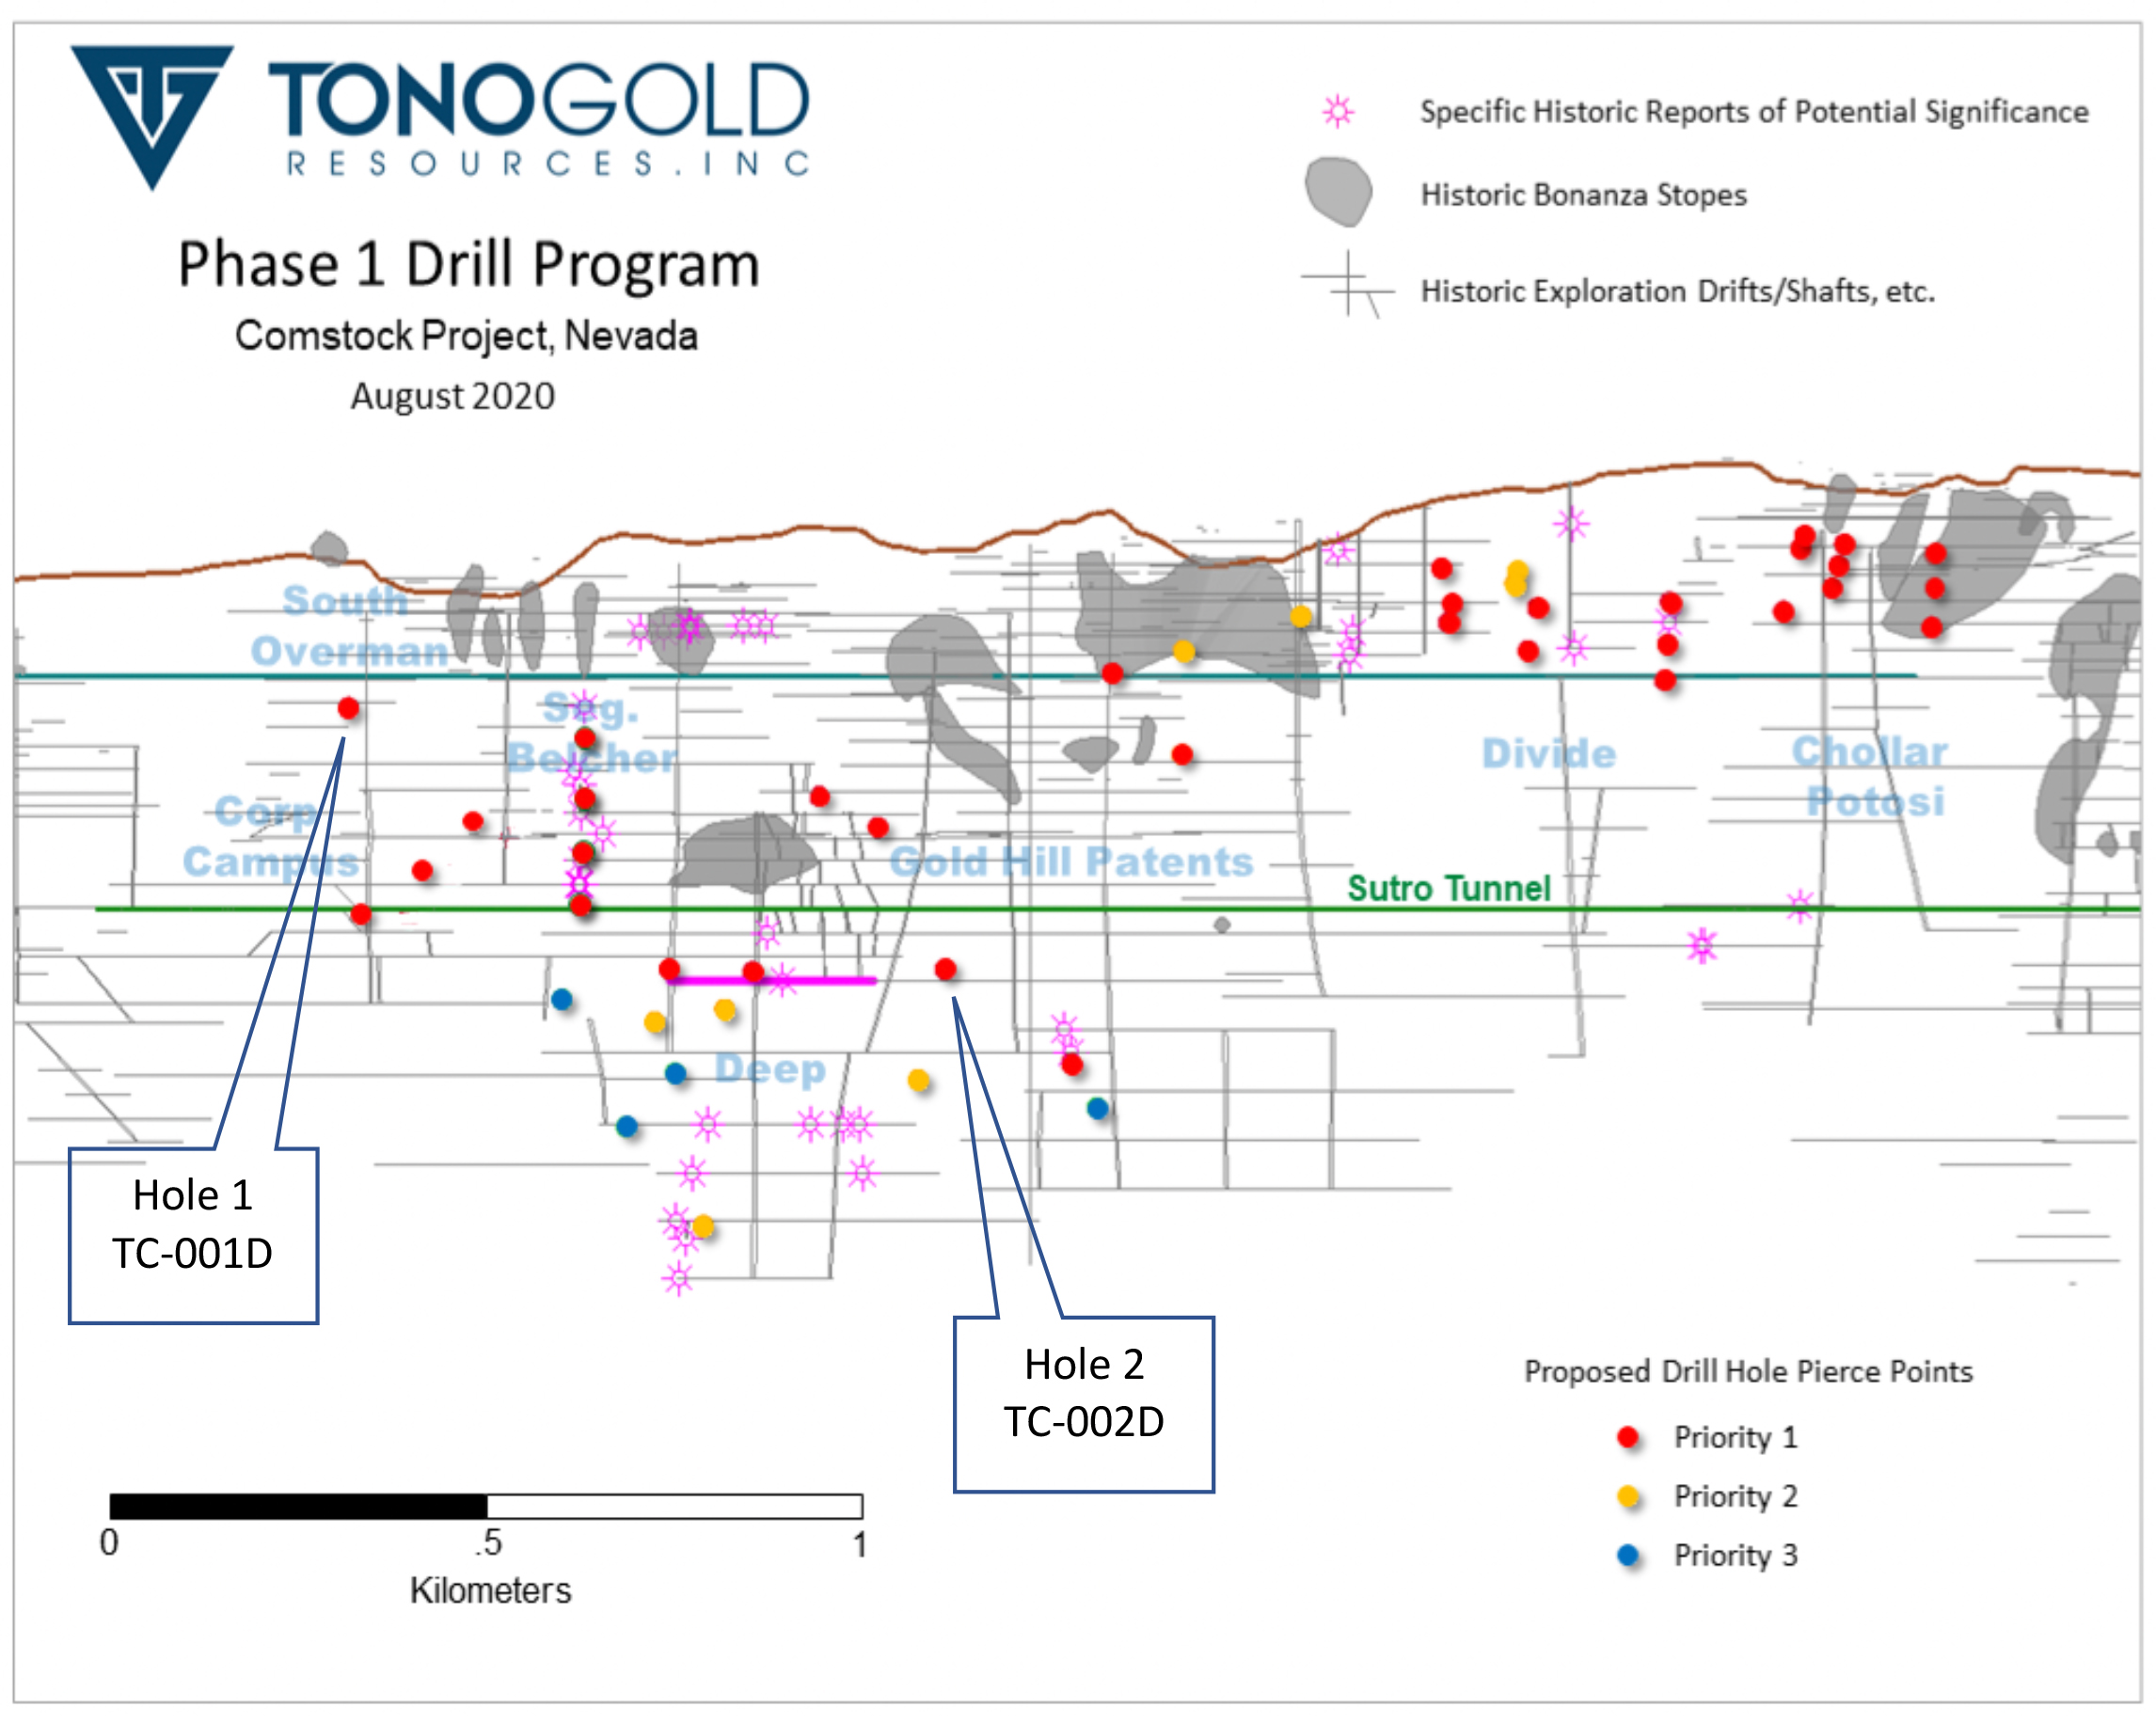 Tonogold Resources Inc, Wednesday, October 7, 2020, Press release picture